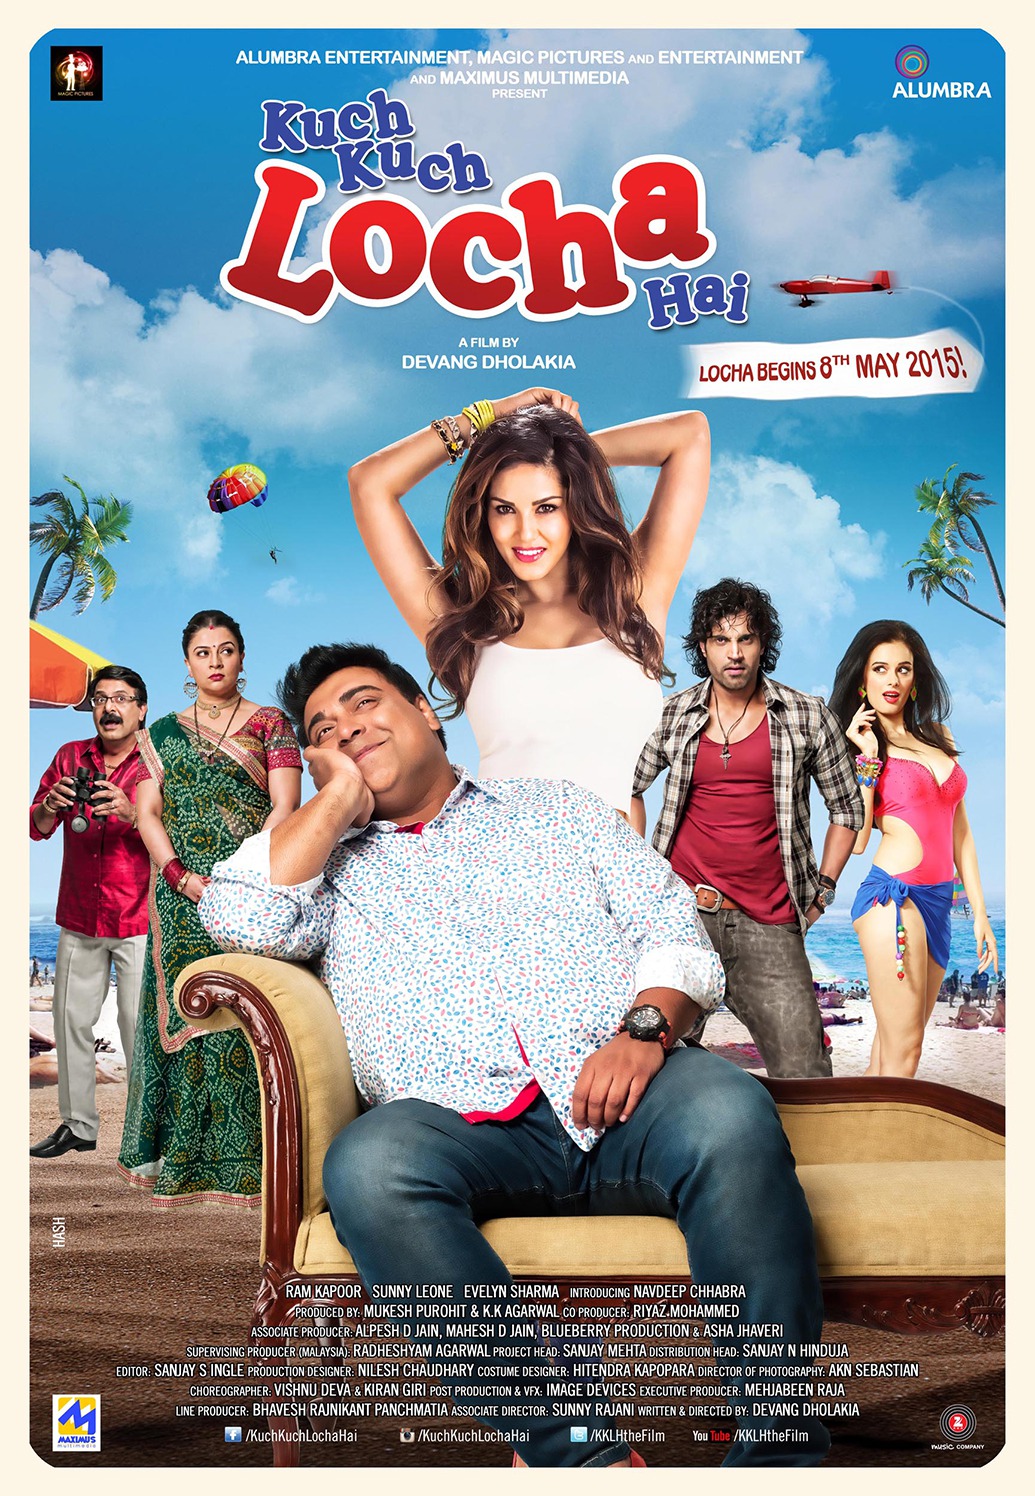 Extra Large Movie Poster Image for Kuch Kuch Locha Hai (#7 of 7)